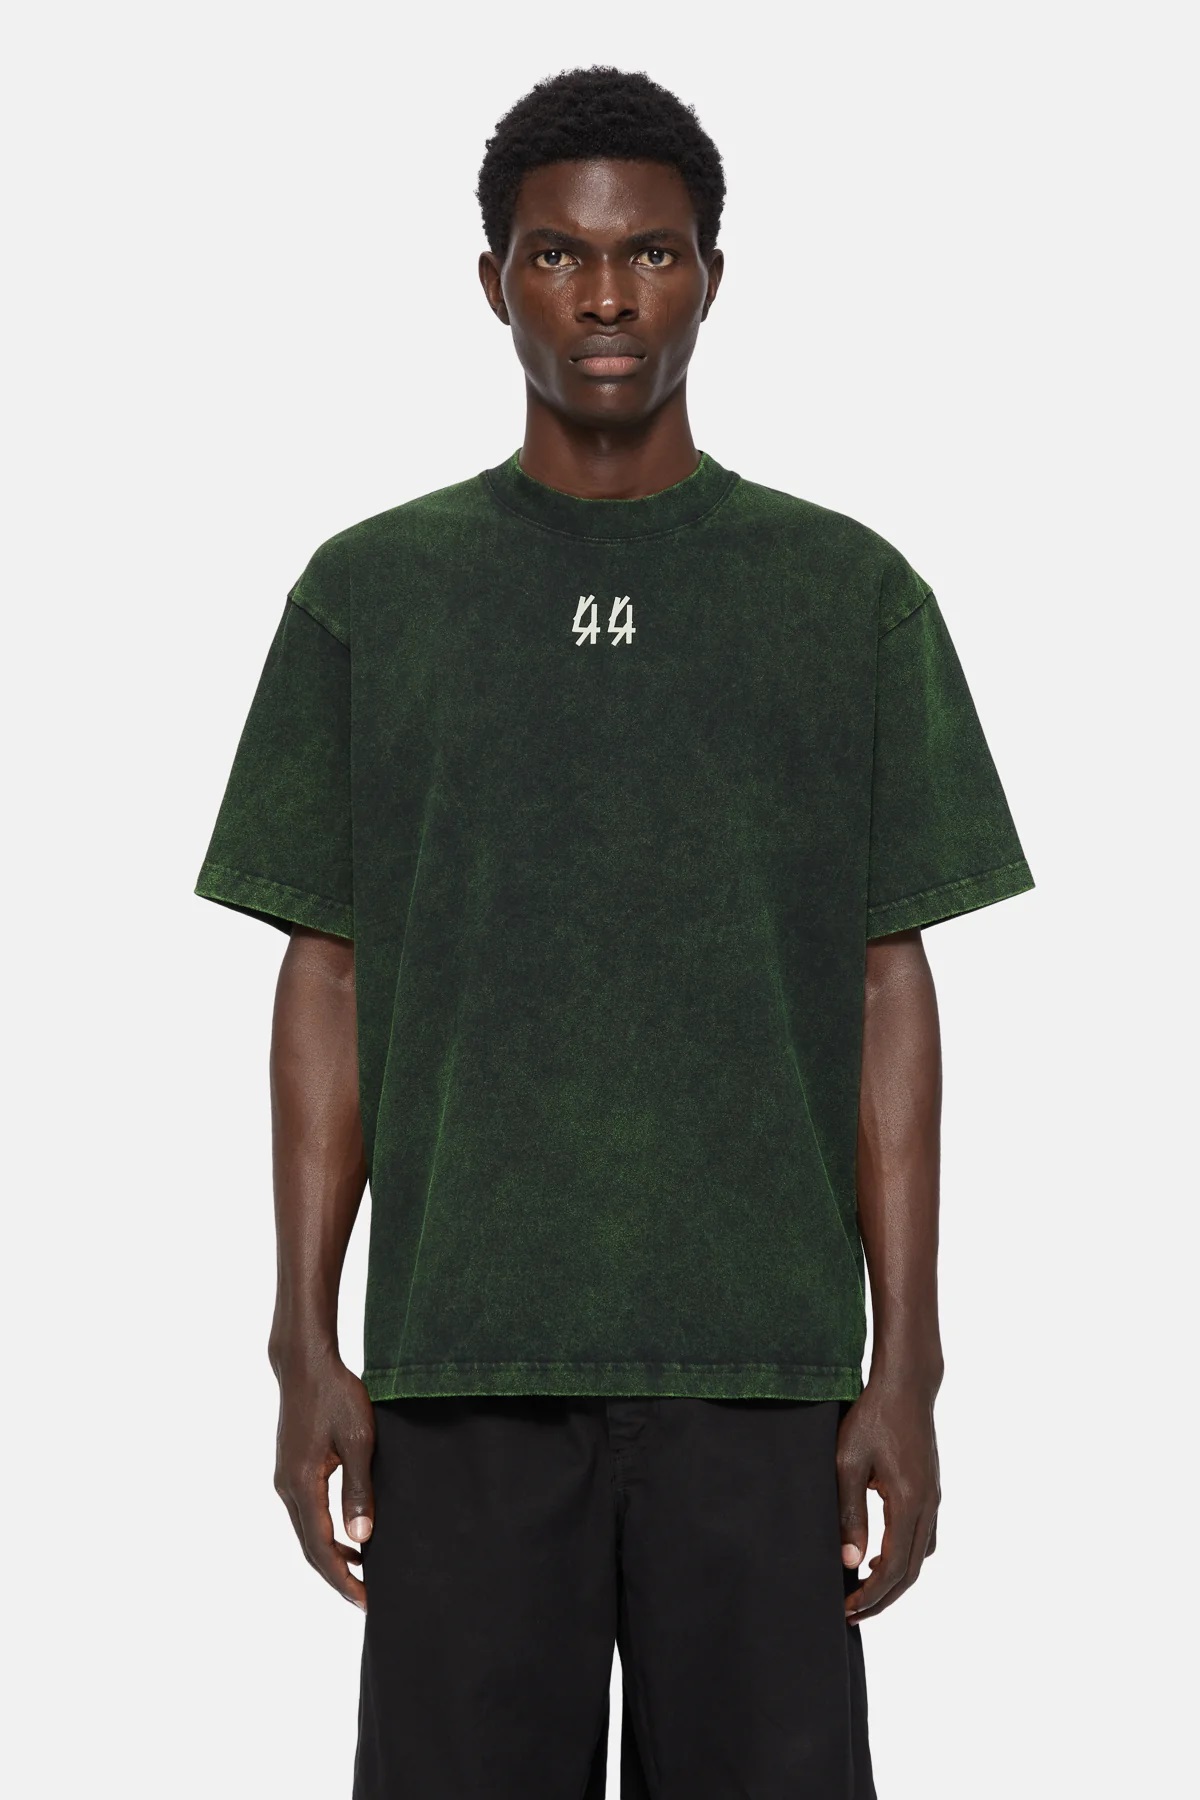 44 LABEL GROUP Overdied Solar Tee in Green M